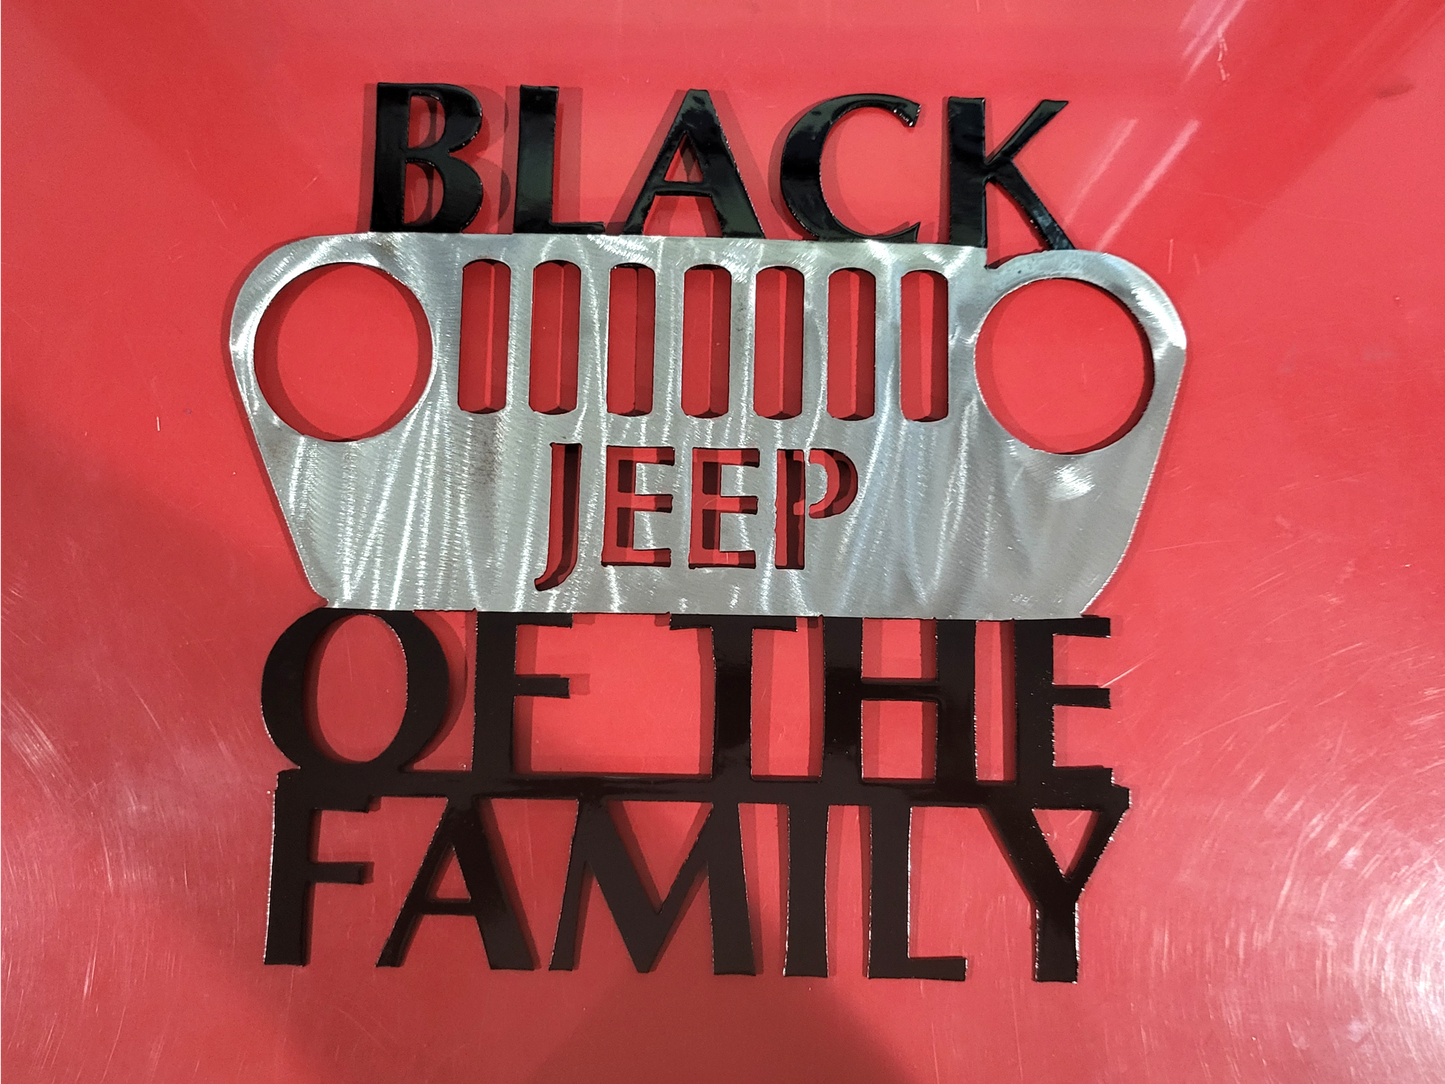 Black Jeep Of the Family Metal Sign